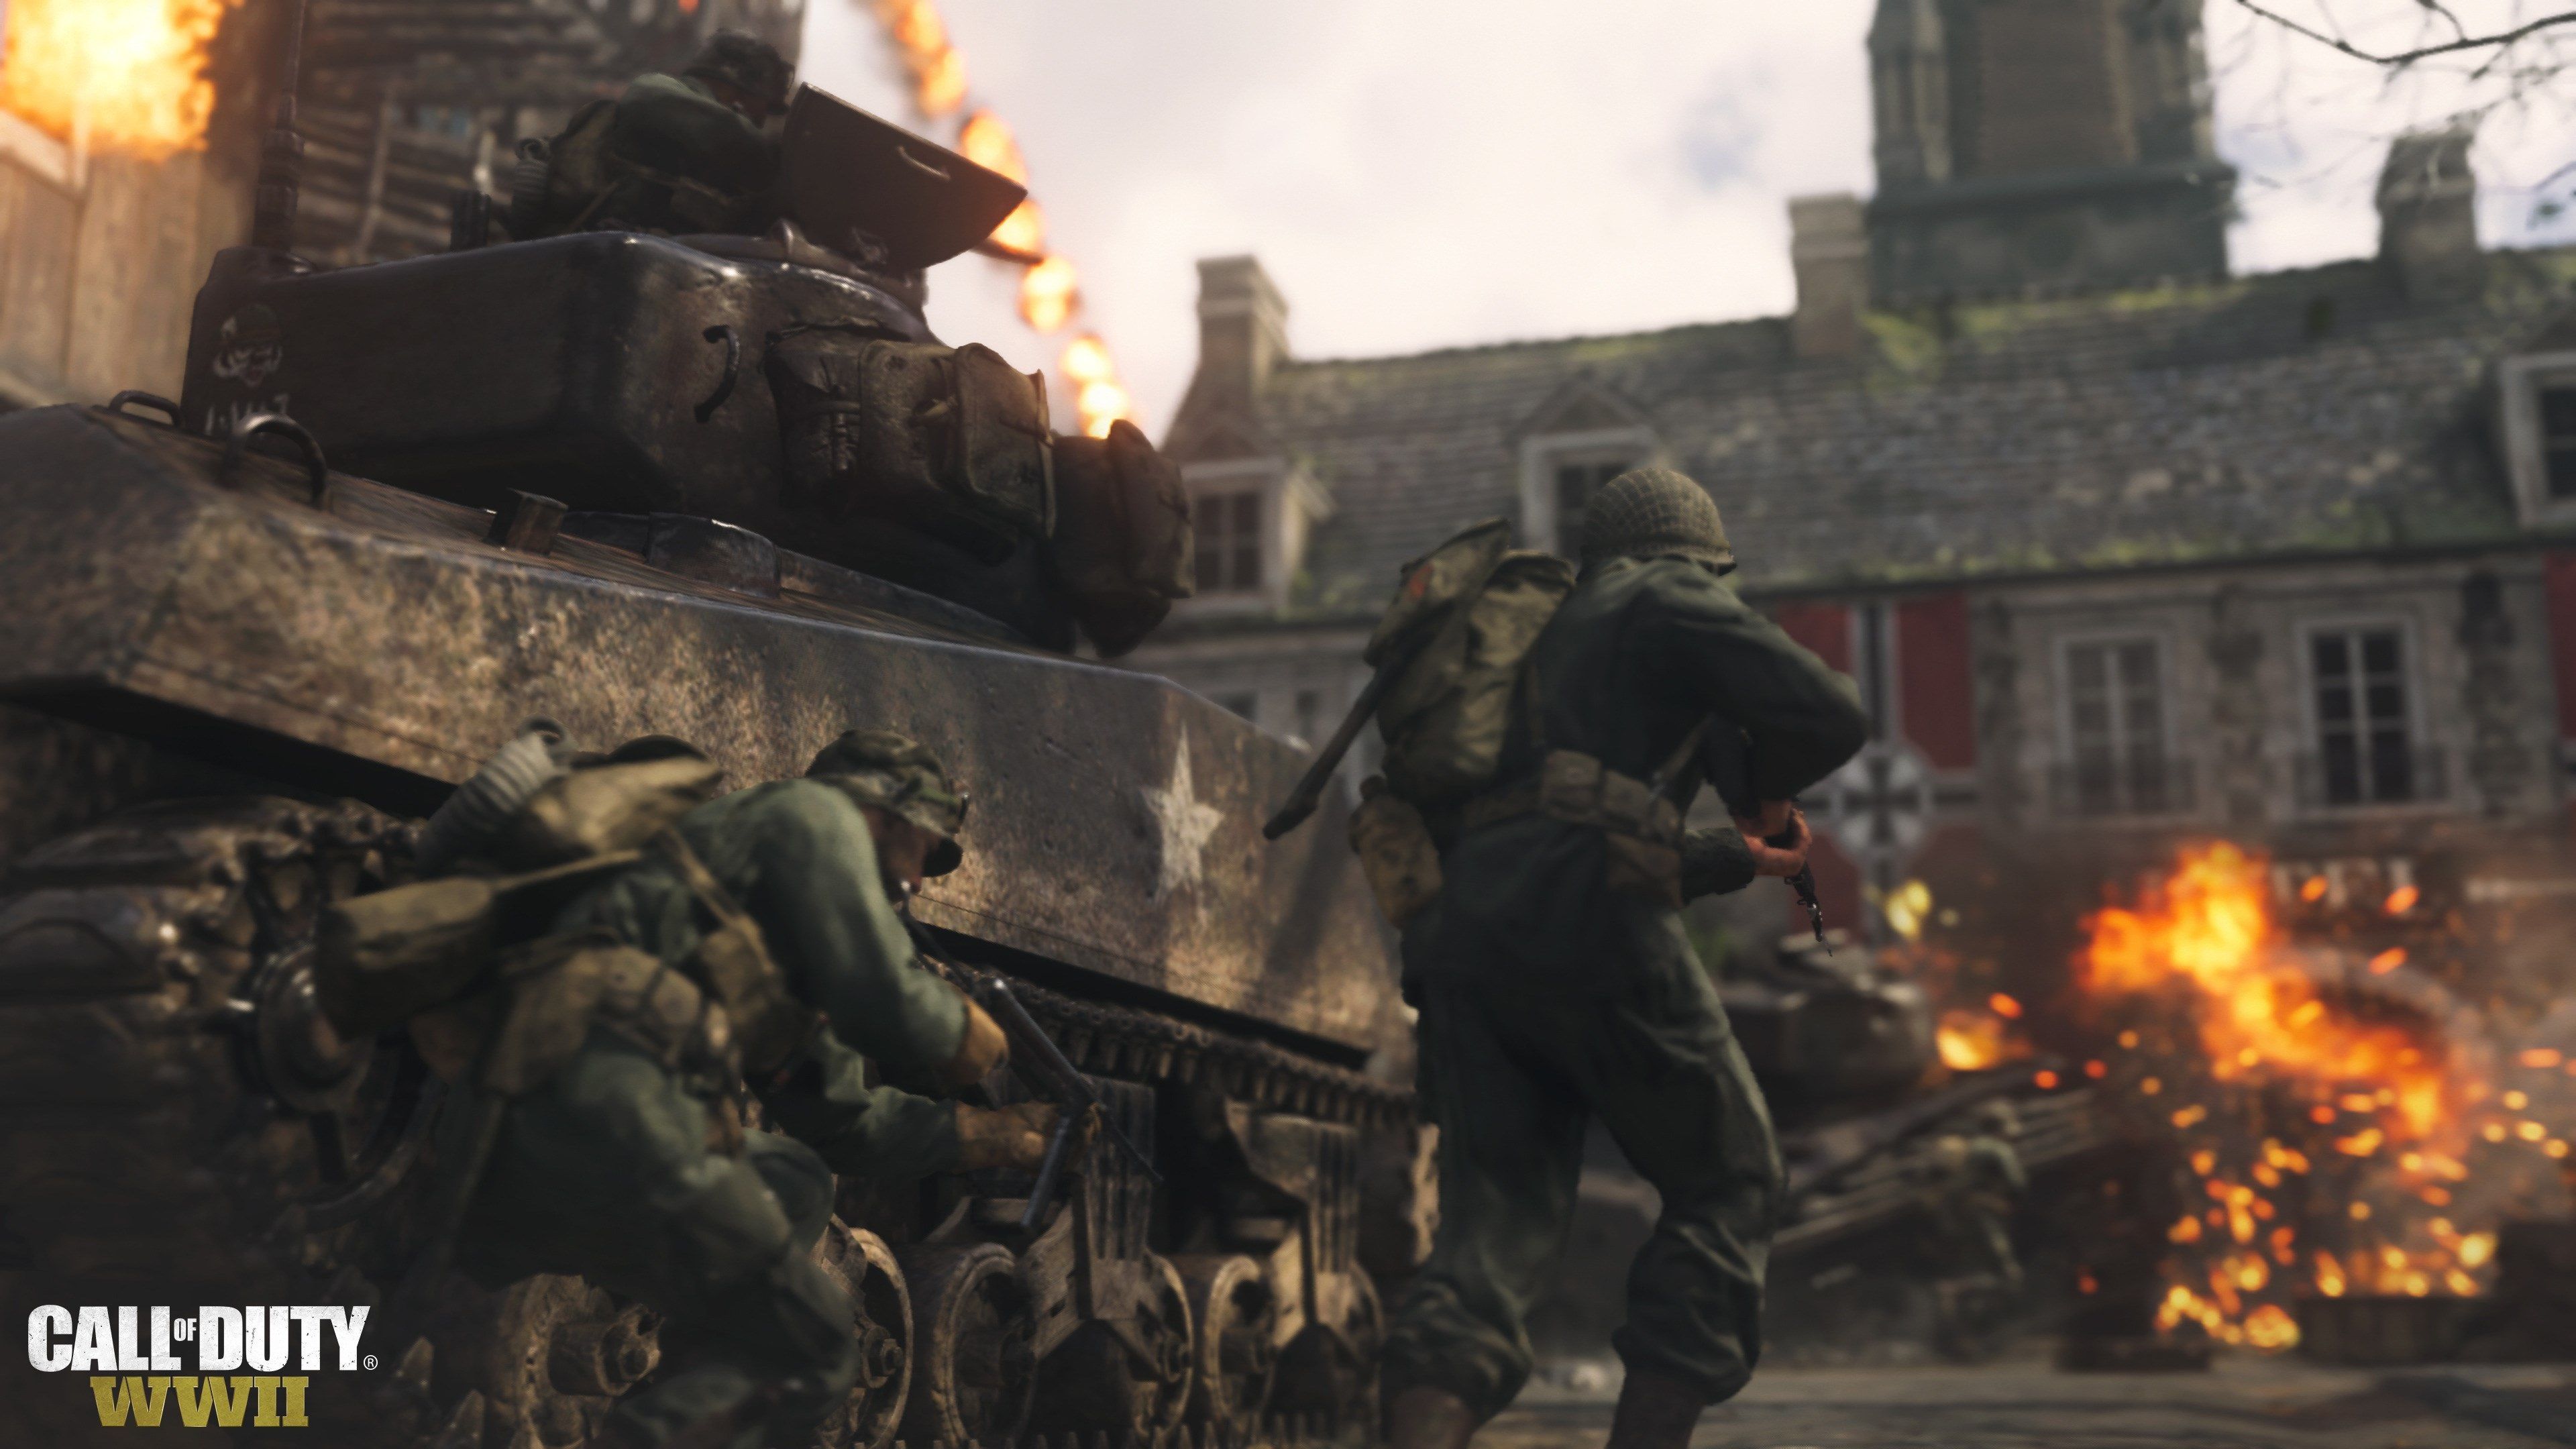 call of duty wwii 4k wallpaper of windows. Call of duty, Call of duty world, Call of duty black